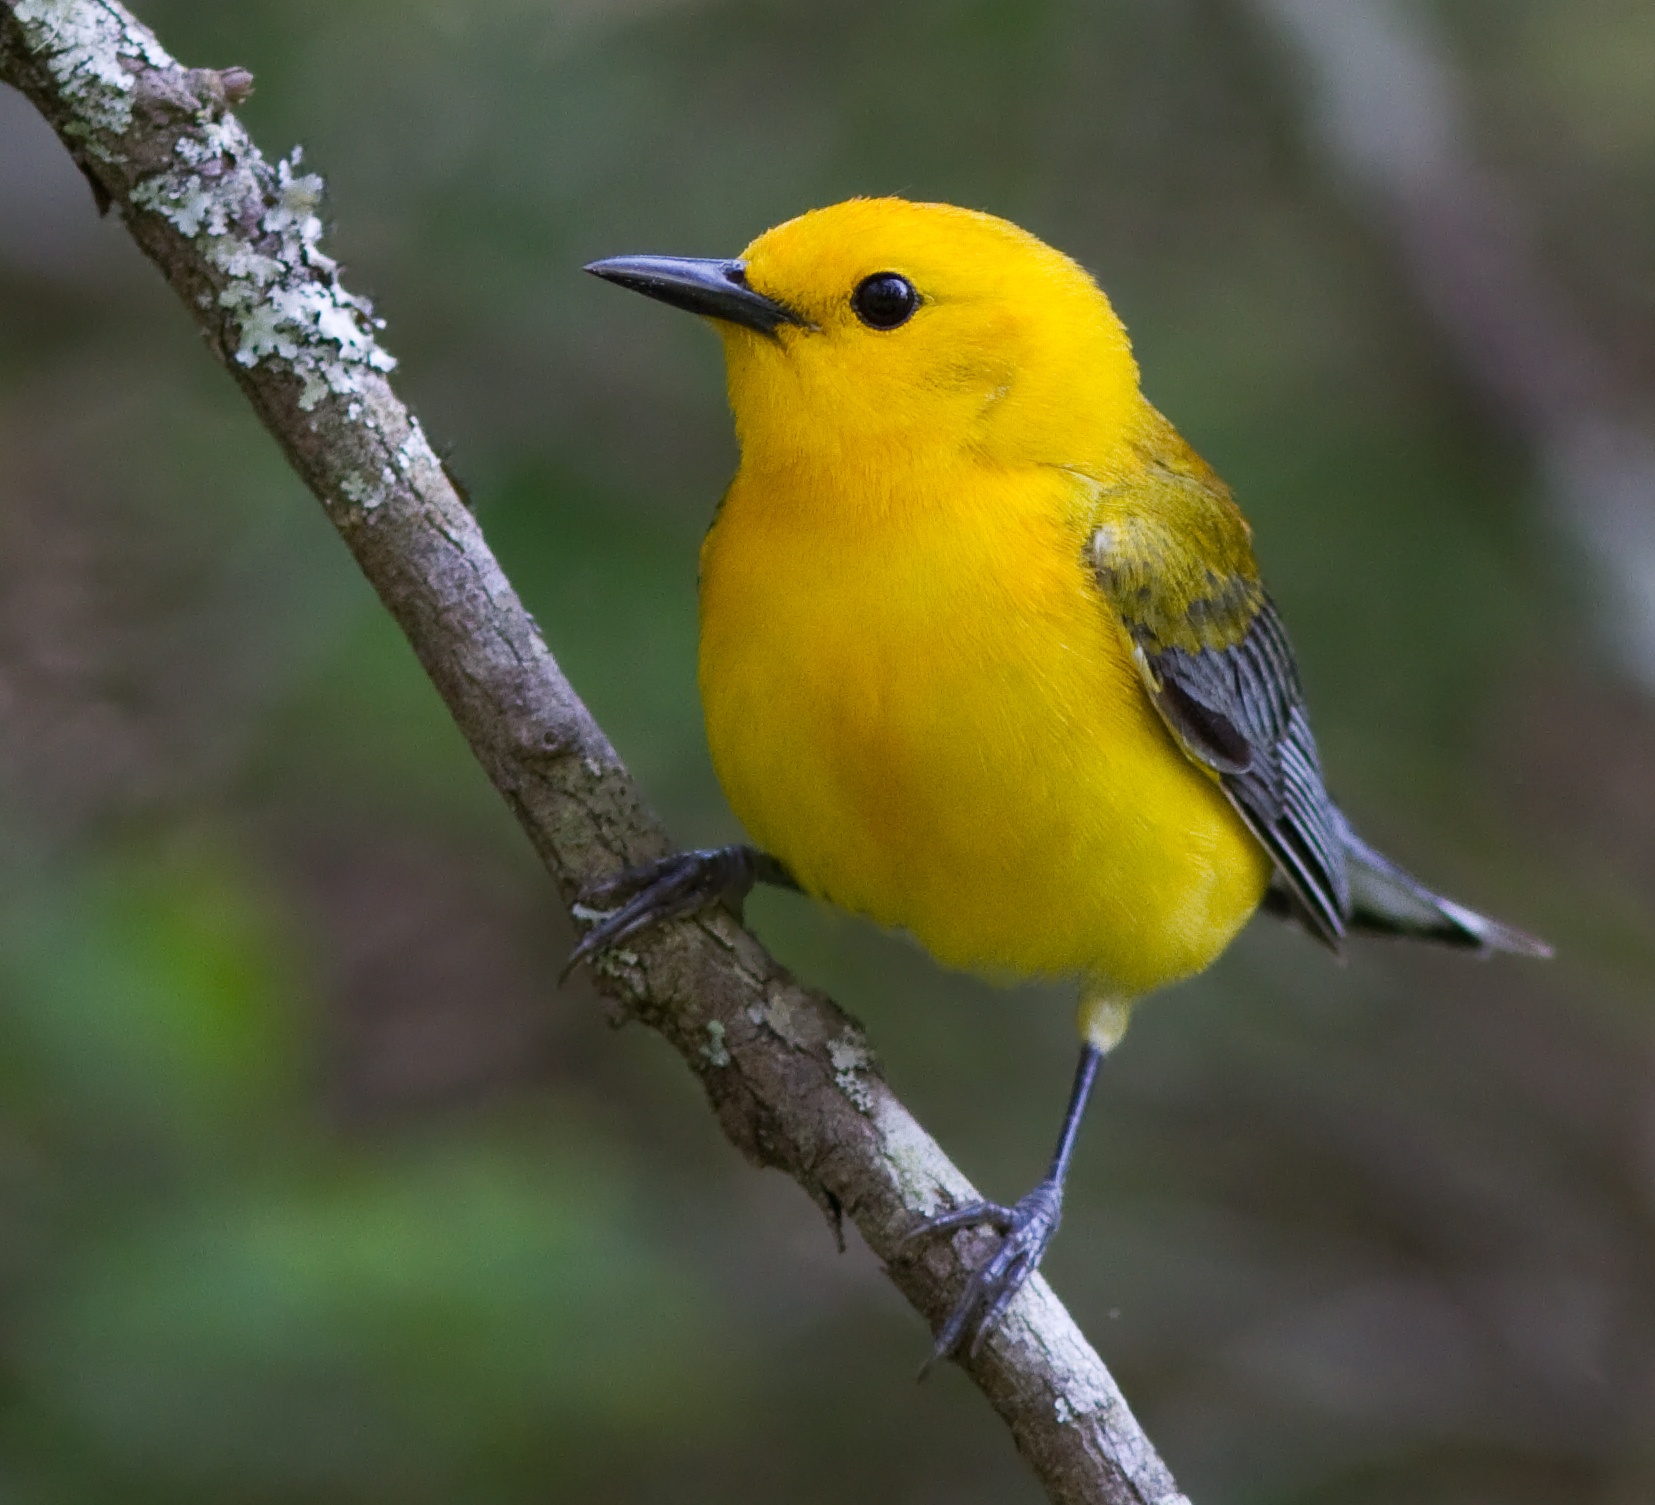 A bright yellow bird with beady black eyes perches on a branch.